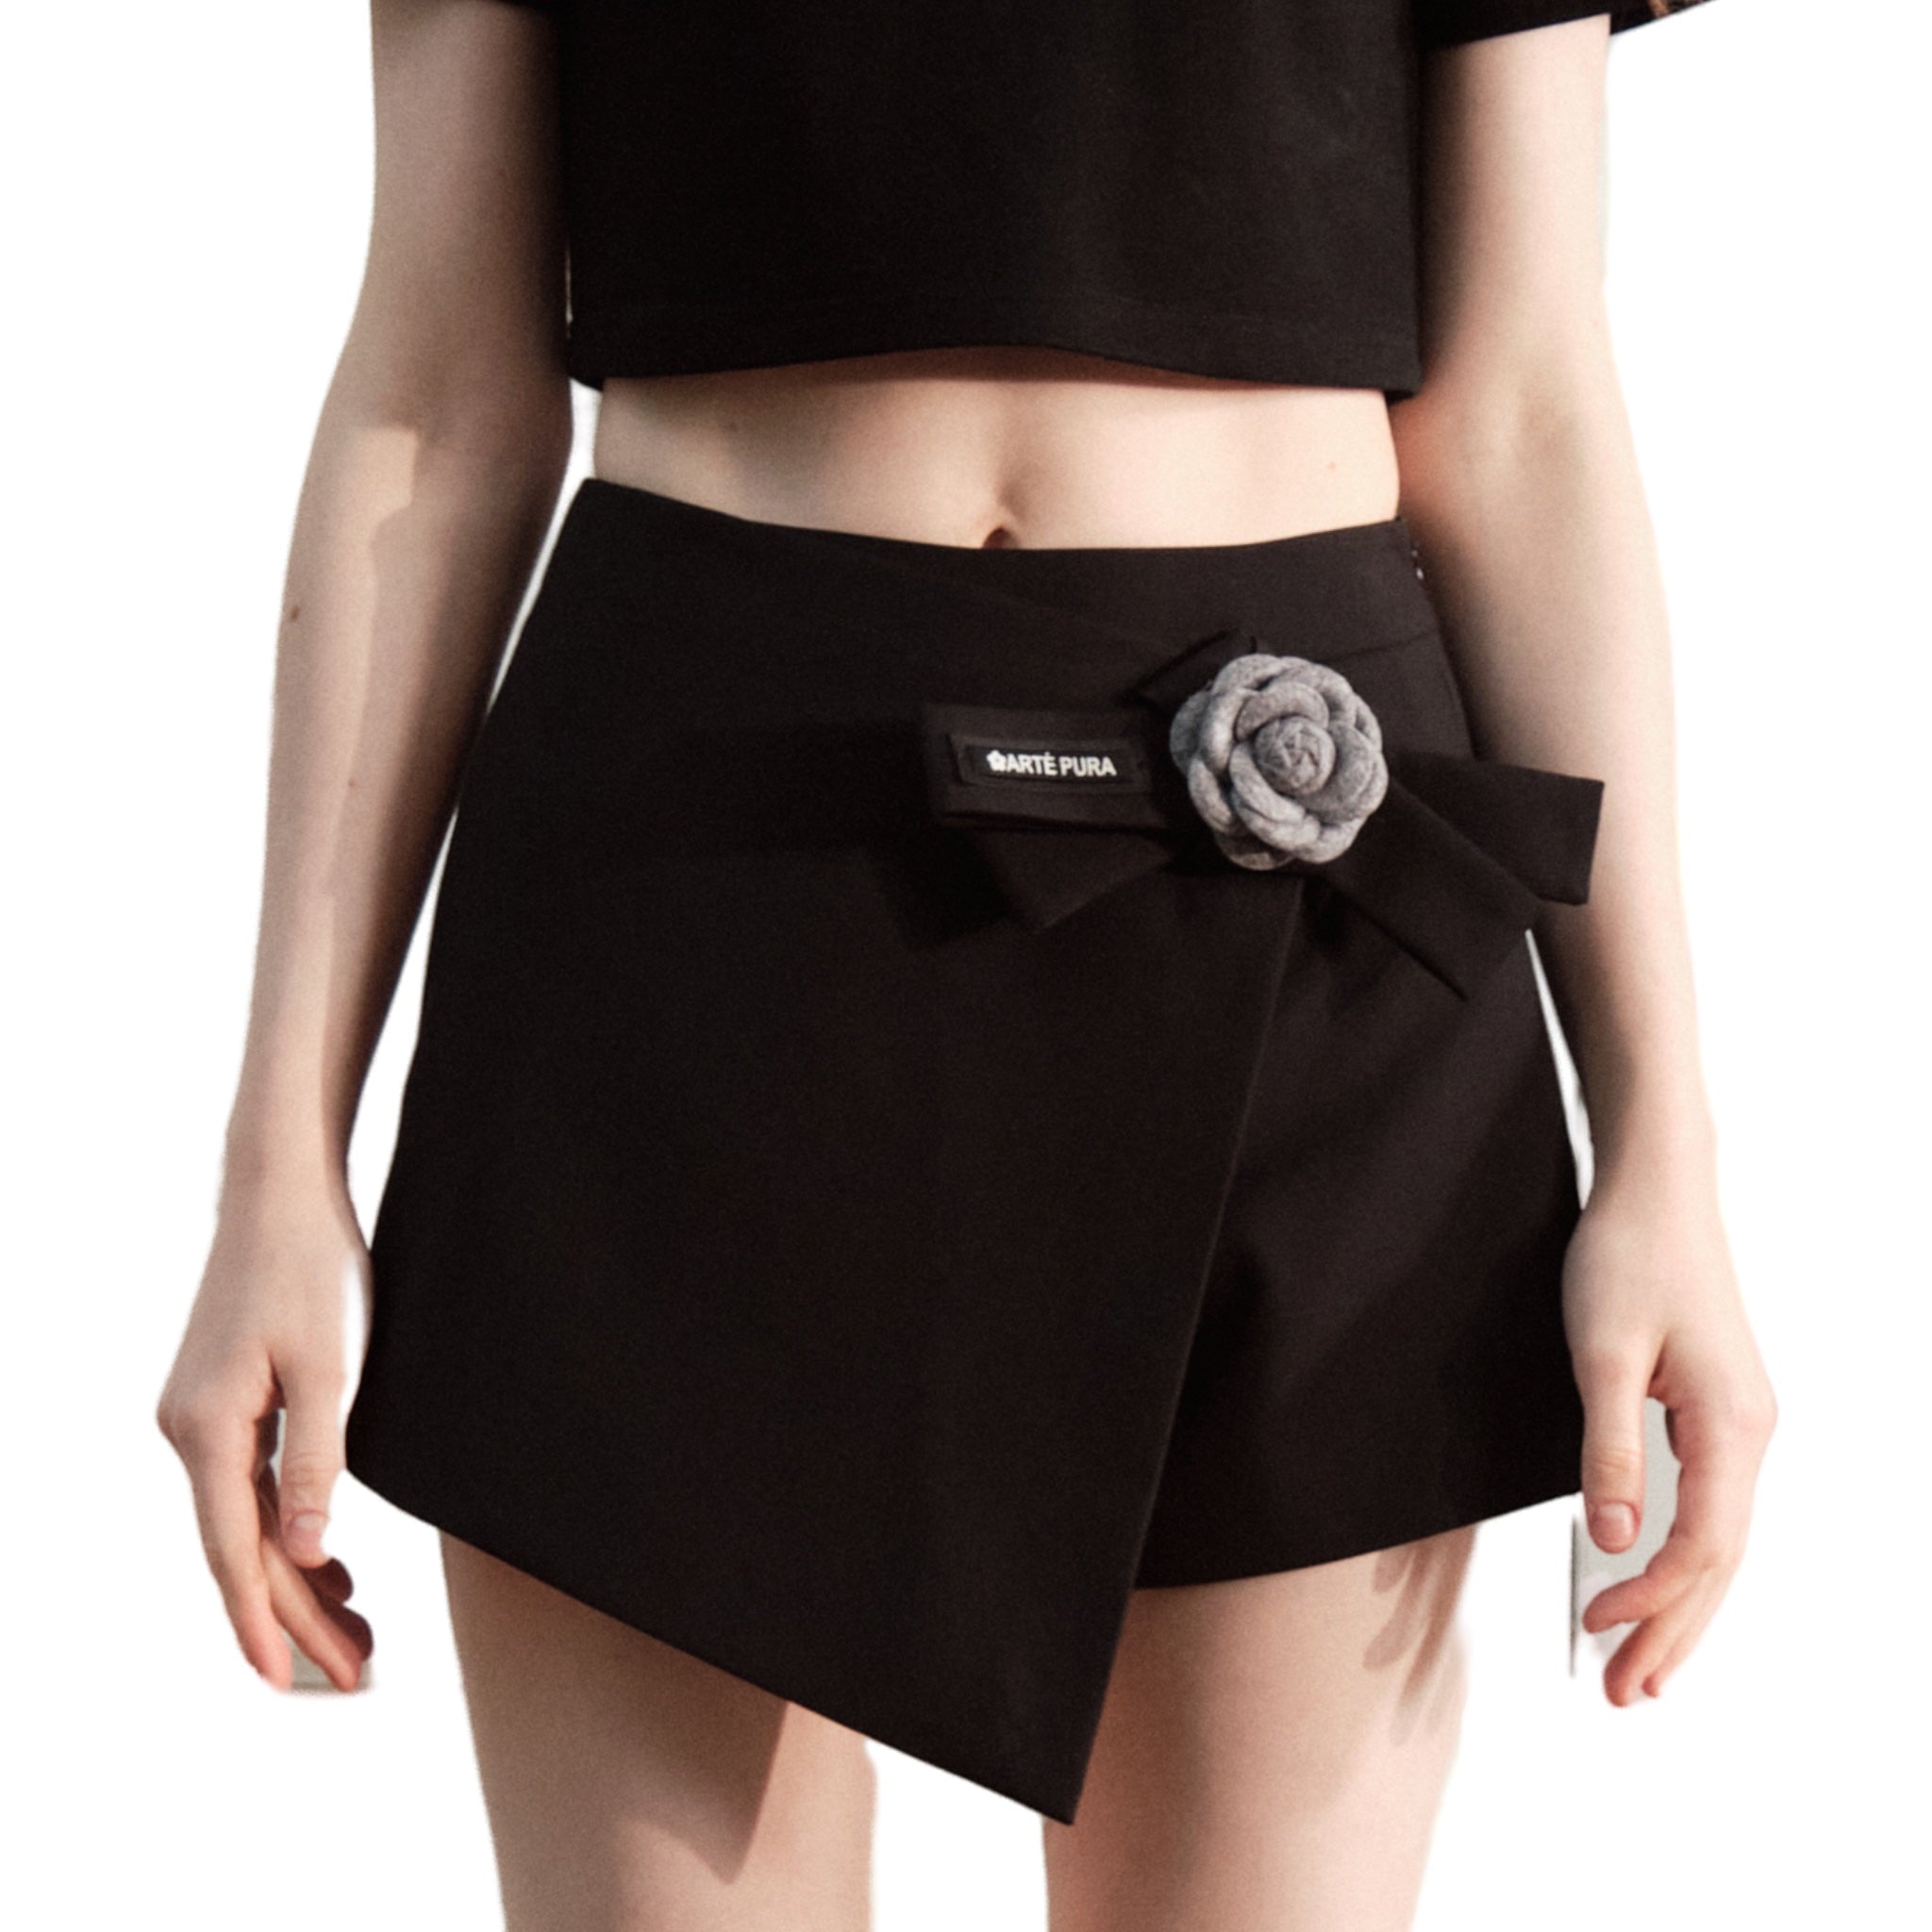 ARTE PURA Black Skirt Pants With Silver Flower | MADA IN CHINA